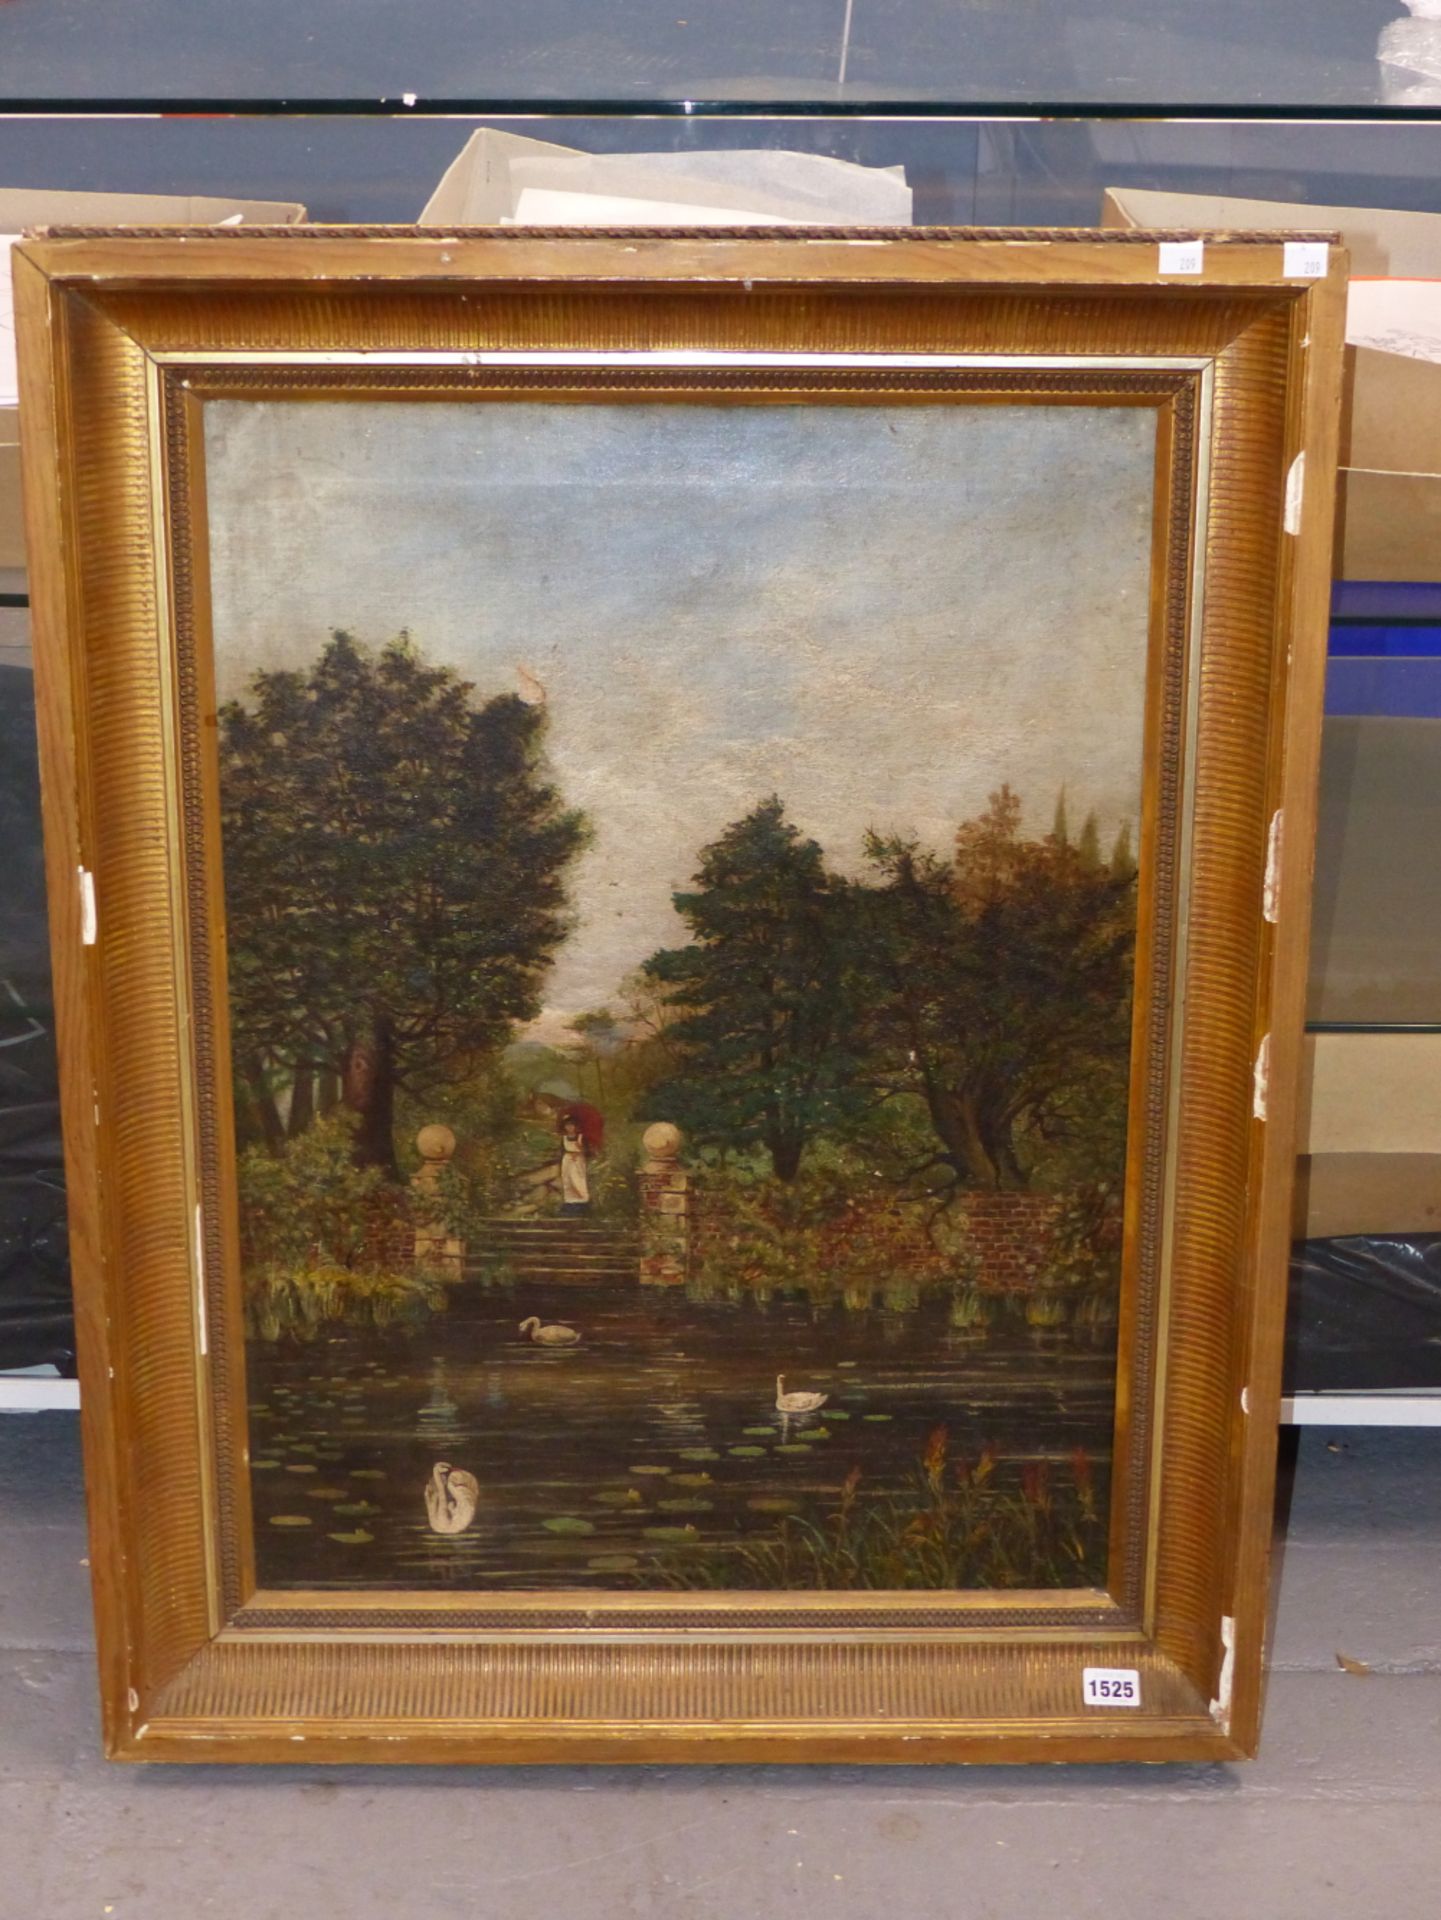 LATE 19th C. ENGLISH SCHOOL BY THE RIVER, OIL ON CANVAS. 69 x 51cms - Image 3 of 4